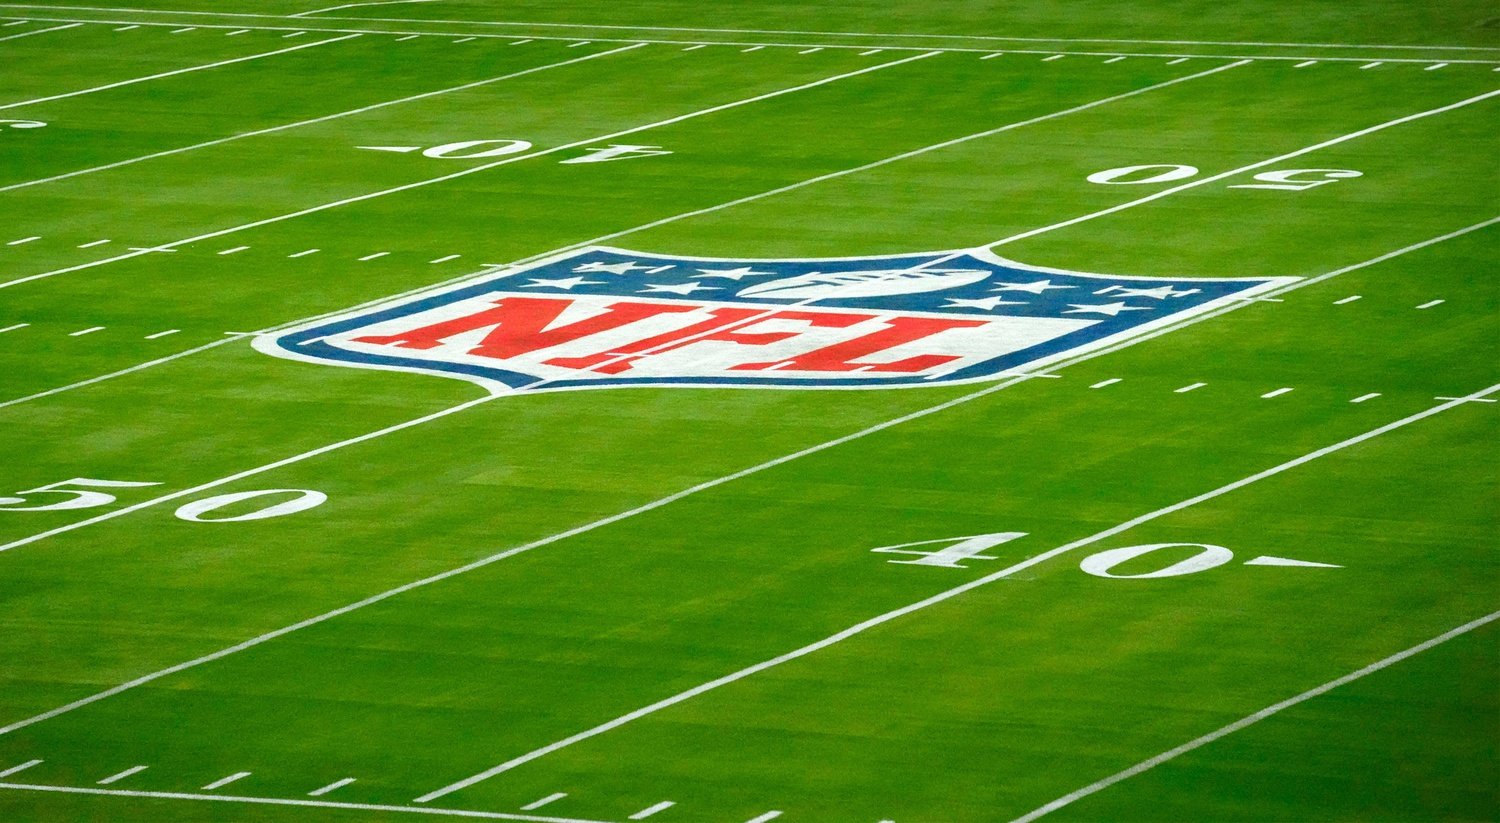 The NFL logo is seen on the field for Super Bowl LVII at State Farm Stadium.